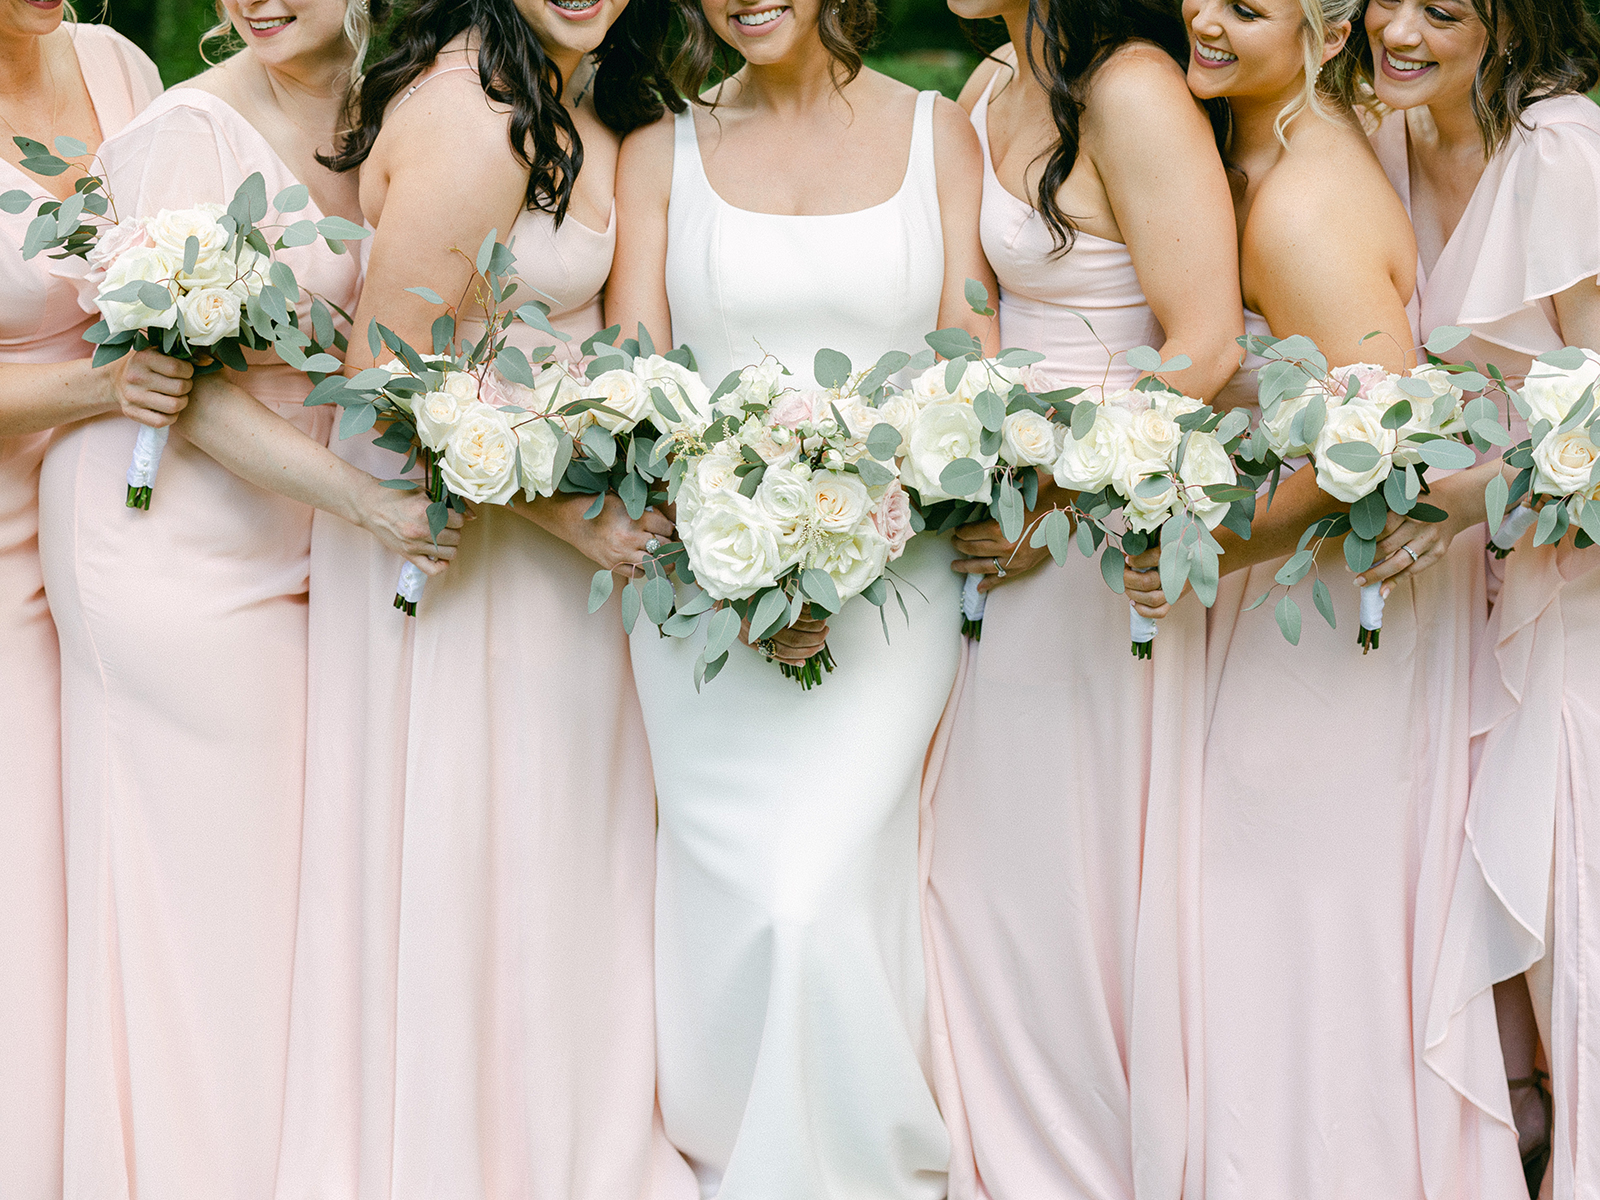 Sklyline Events and Socials Coordinating Florals for Bridal Party